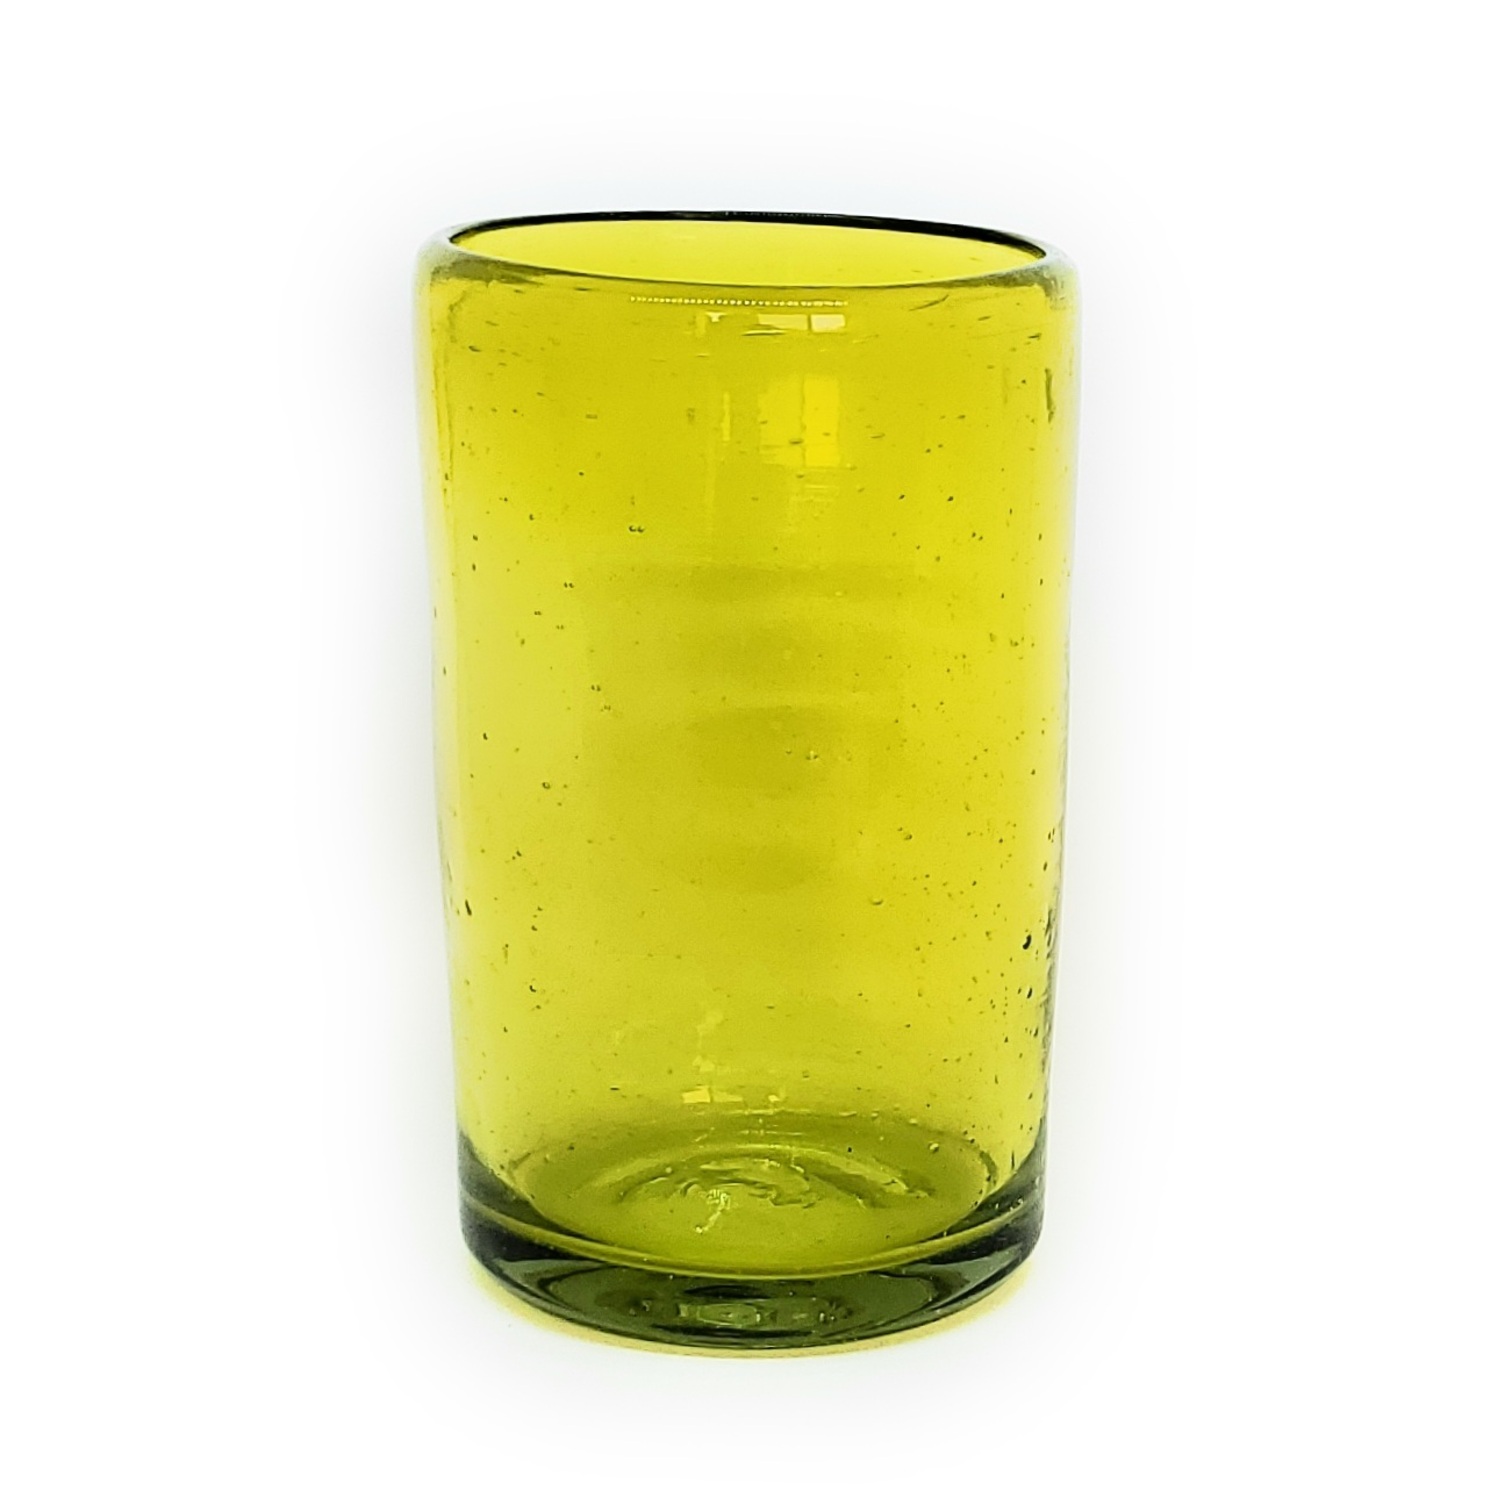 MEXICAN GLASSWARE / Solid Yellow 14 oz Drinking Glasses (set of 6)